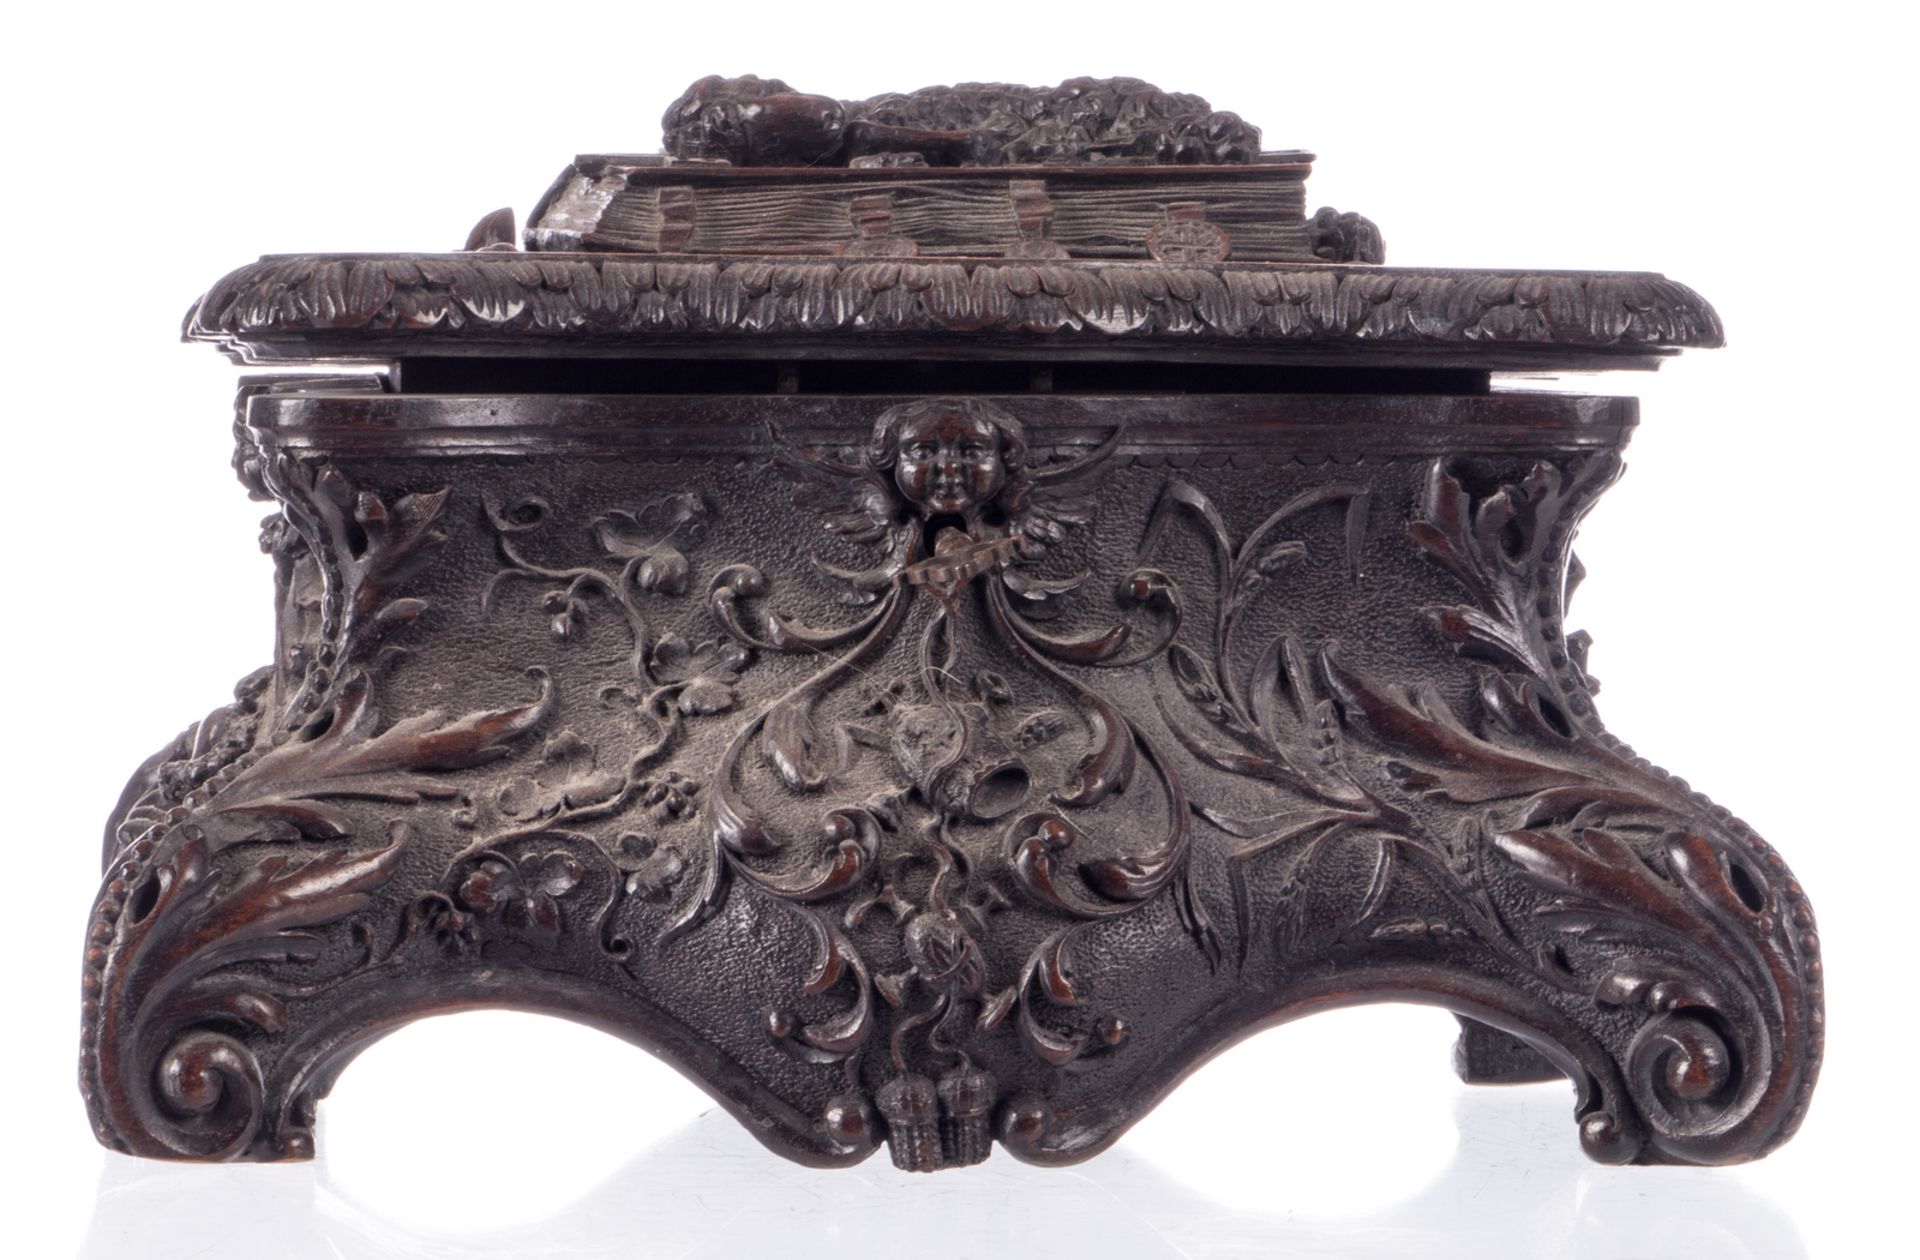 A sculpted walnut jewelry box decorated with religious symbols, H 16 - W 32 - D 26 cm - Bild 2 aus 11